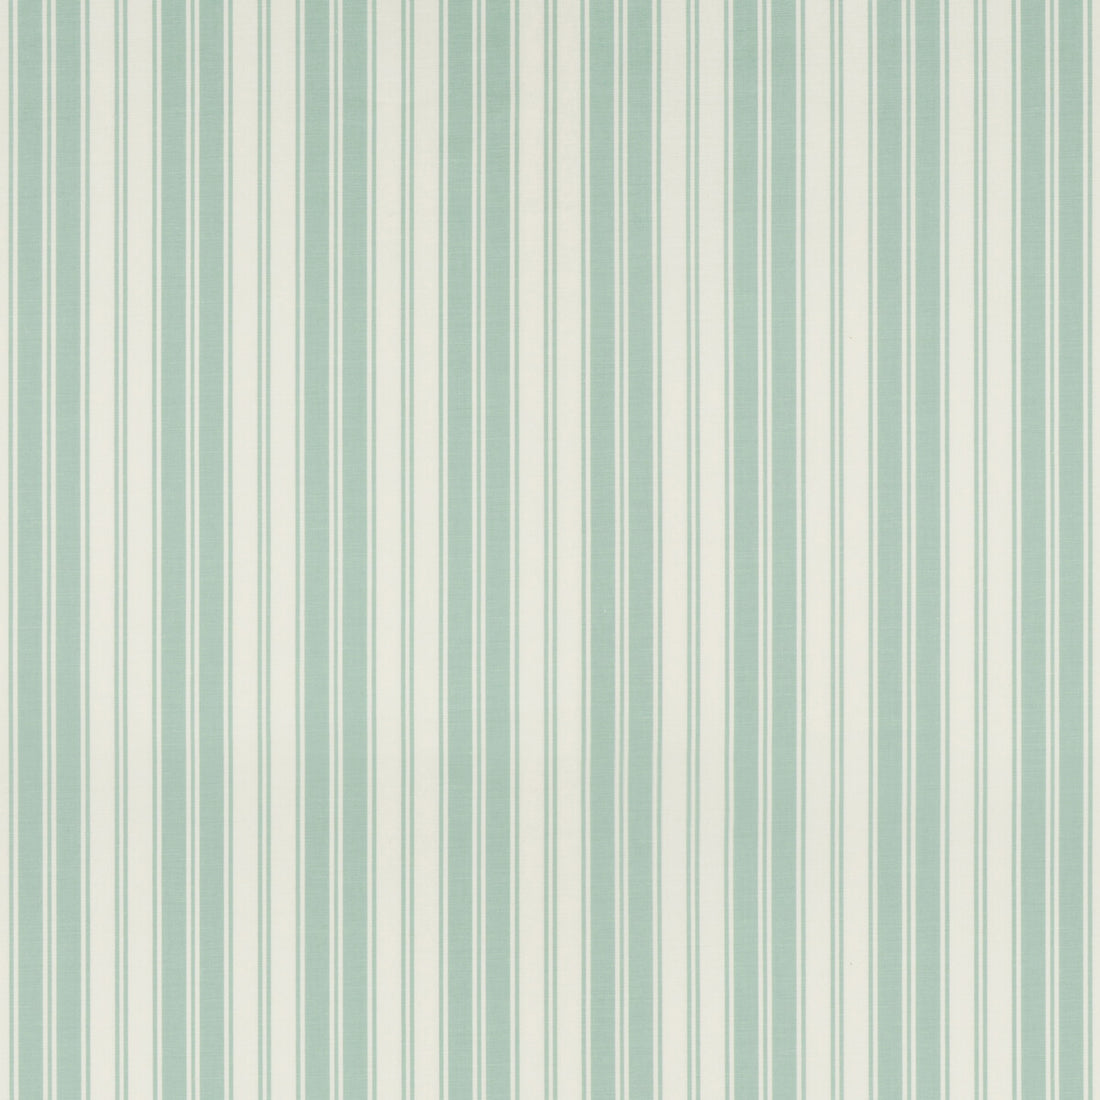 Audemar Stripe fabric in aqua color - pattern 8019106.13.0 - by Brunschwig &amp; Fils in the Normant Checks And Stripes collection